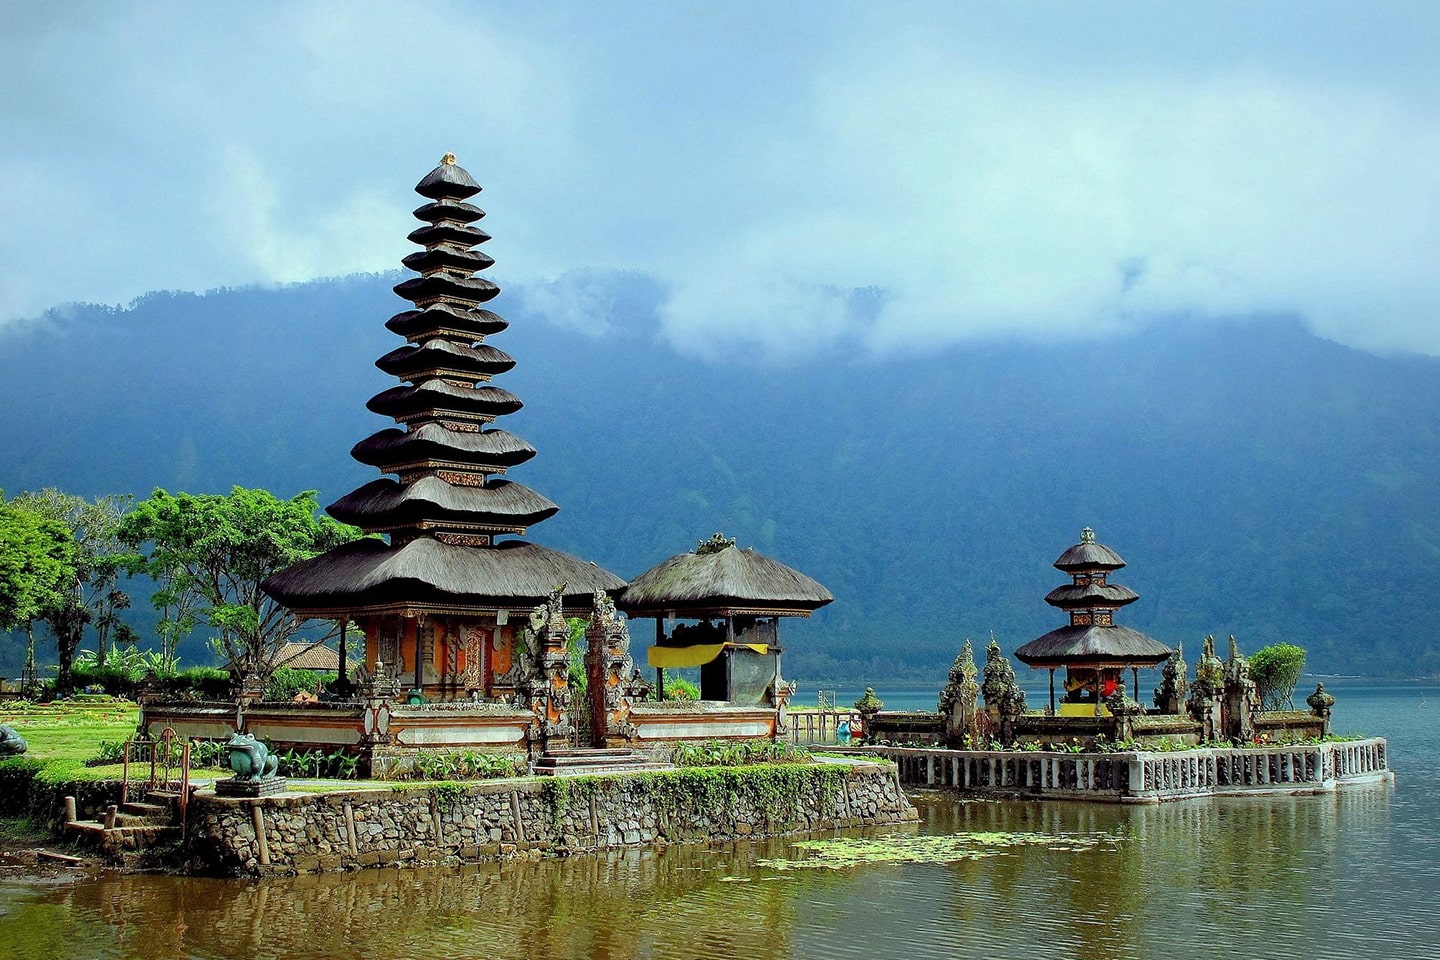 Bali Tour Packages | Get Great Deals | IND Travel